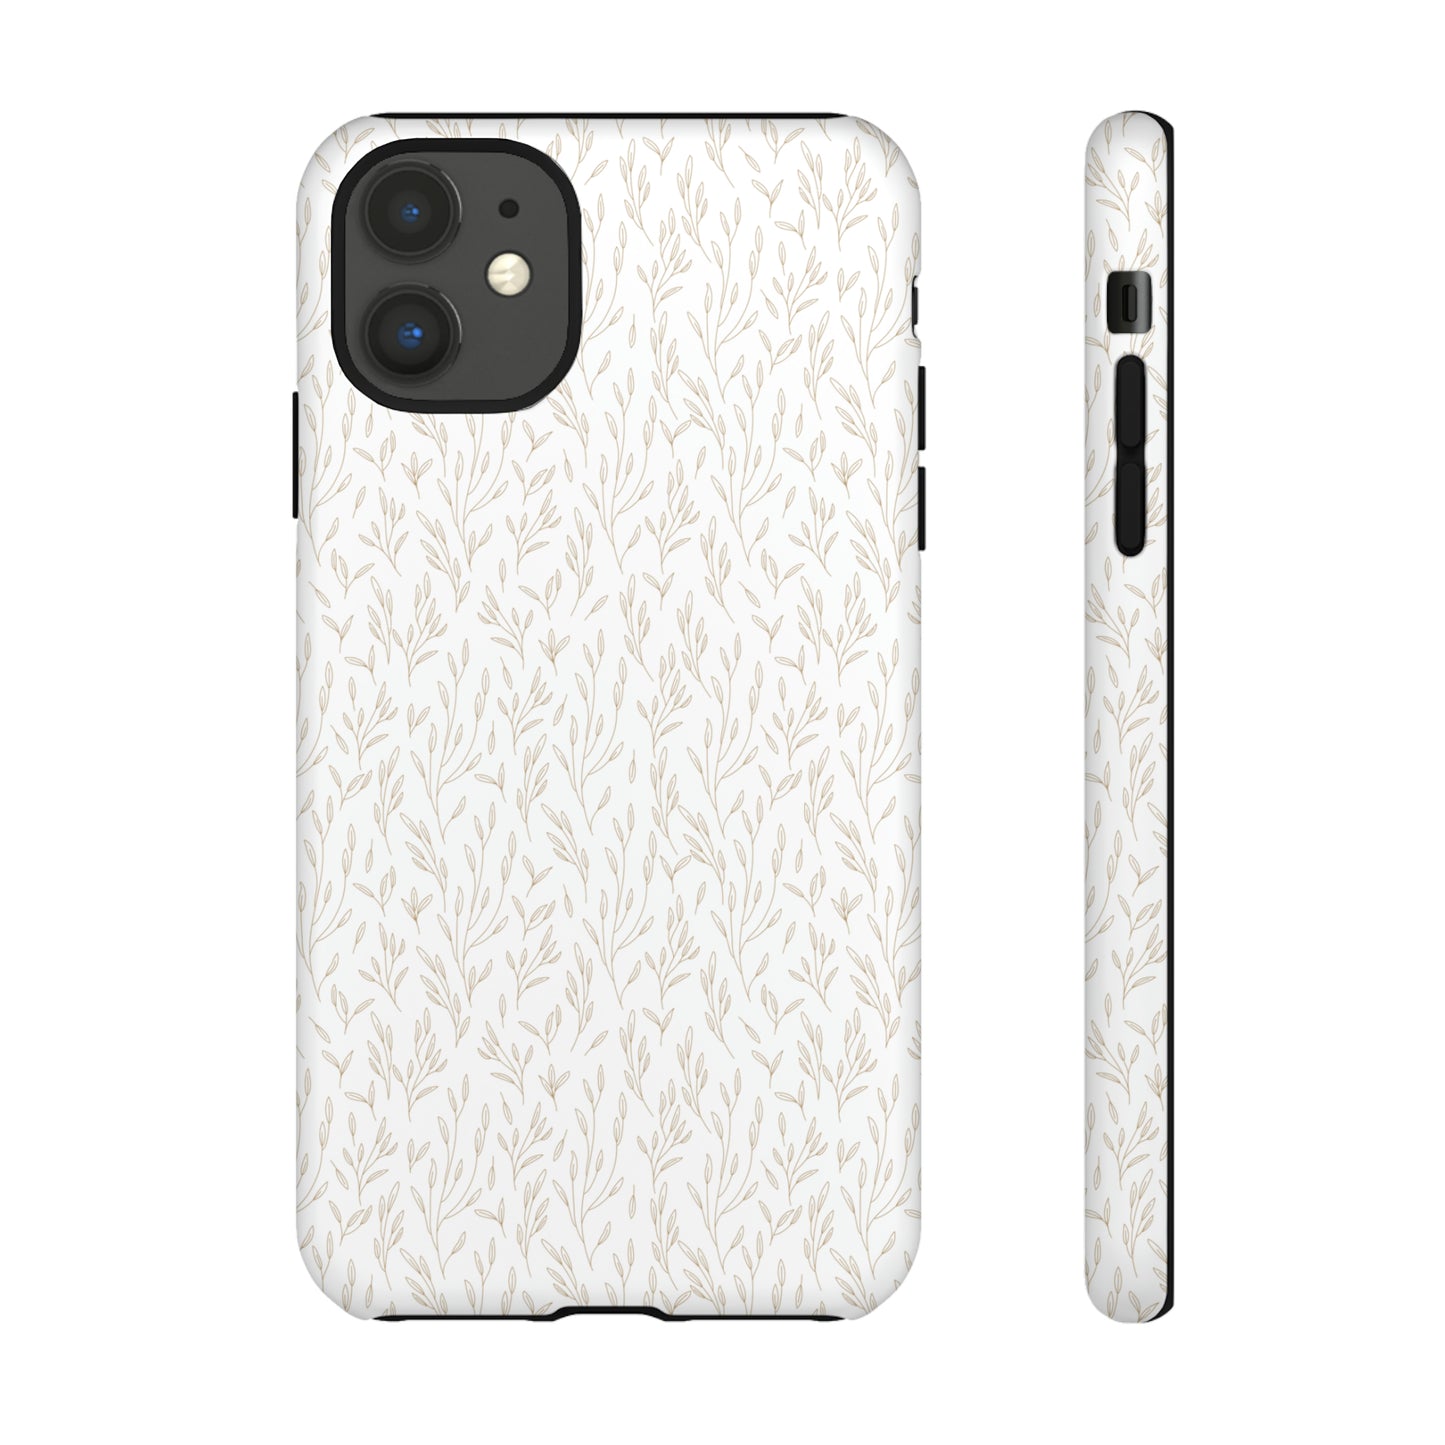 Double-Layer Tough Case for the Delicately Bold